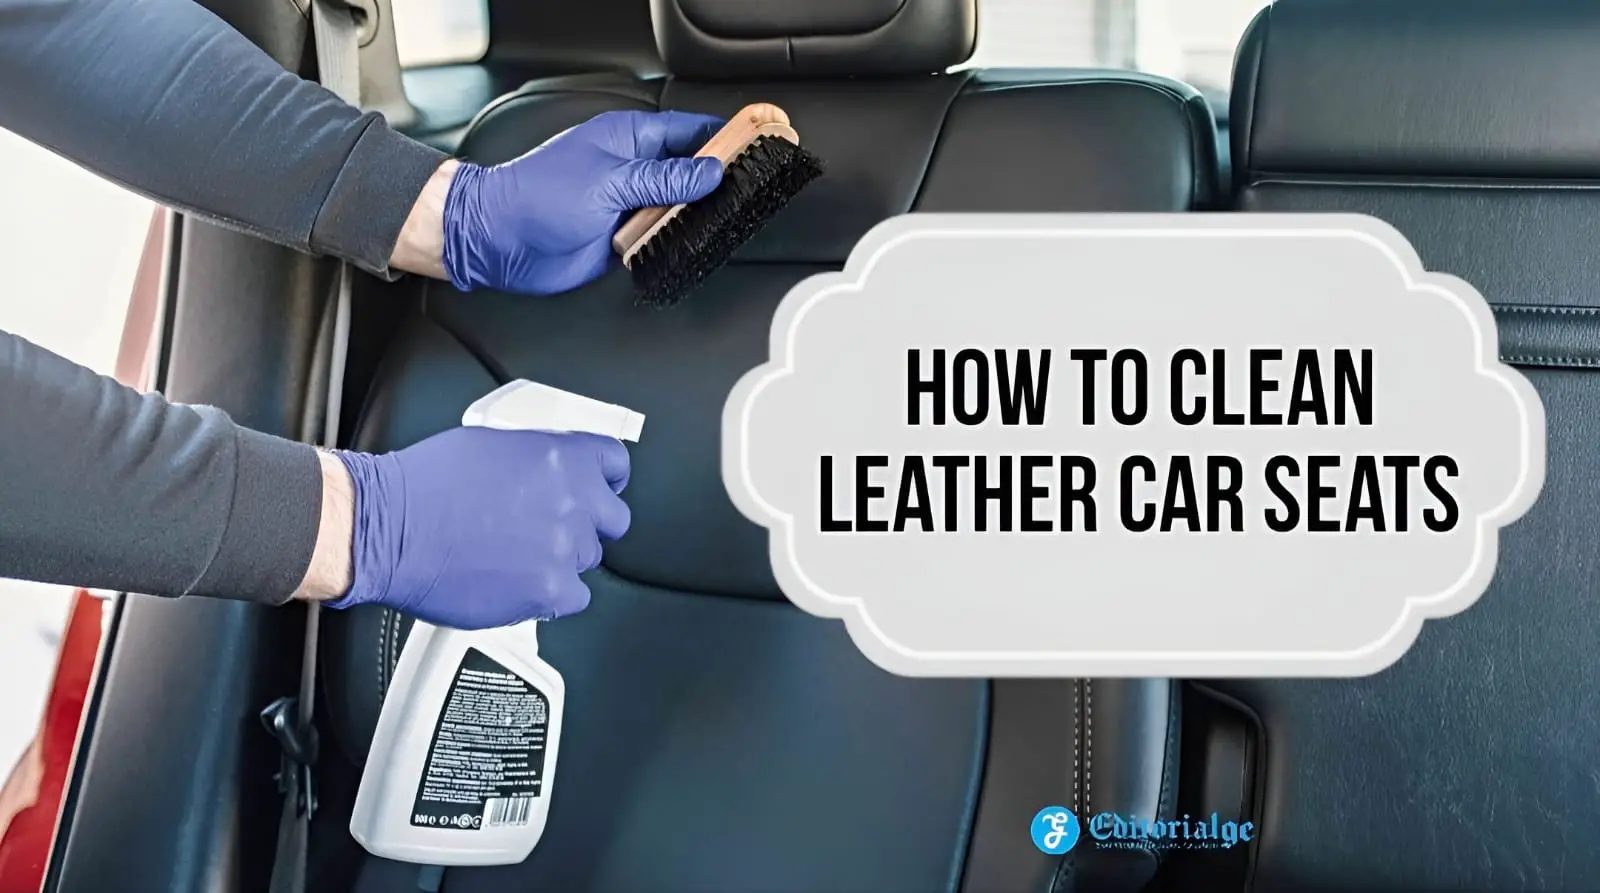 How to Clean Leather Car Seats? – Discover the Easy and Effective Ways